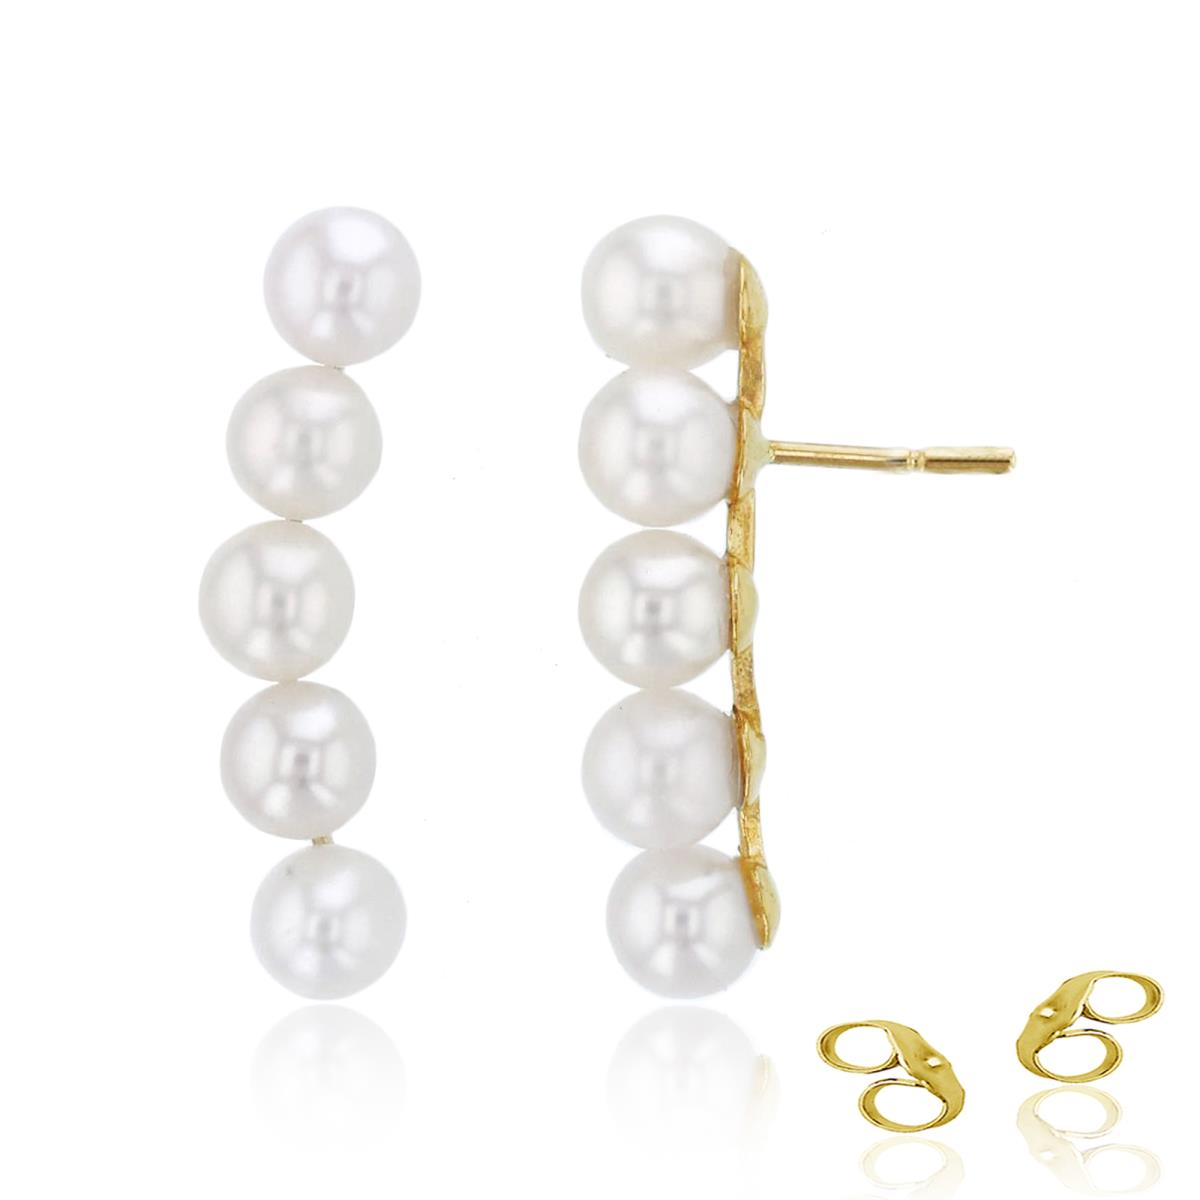 14K Yellow Gold 4mm Rnd Fresh Water Pearl Crawl Earrings with 4.5mm Clutch